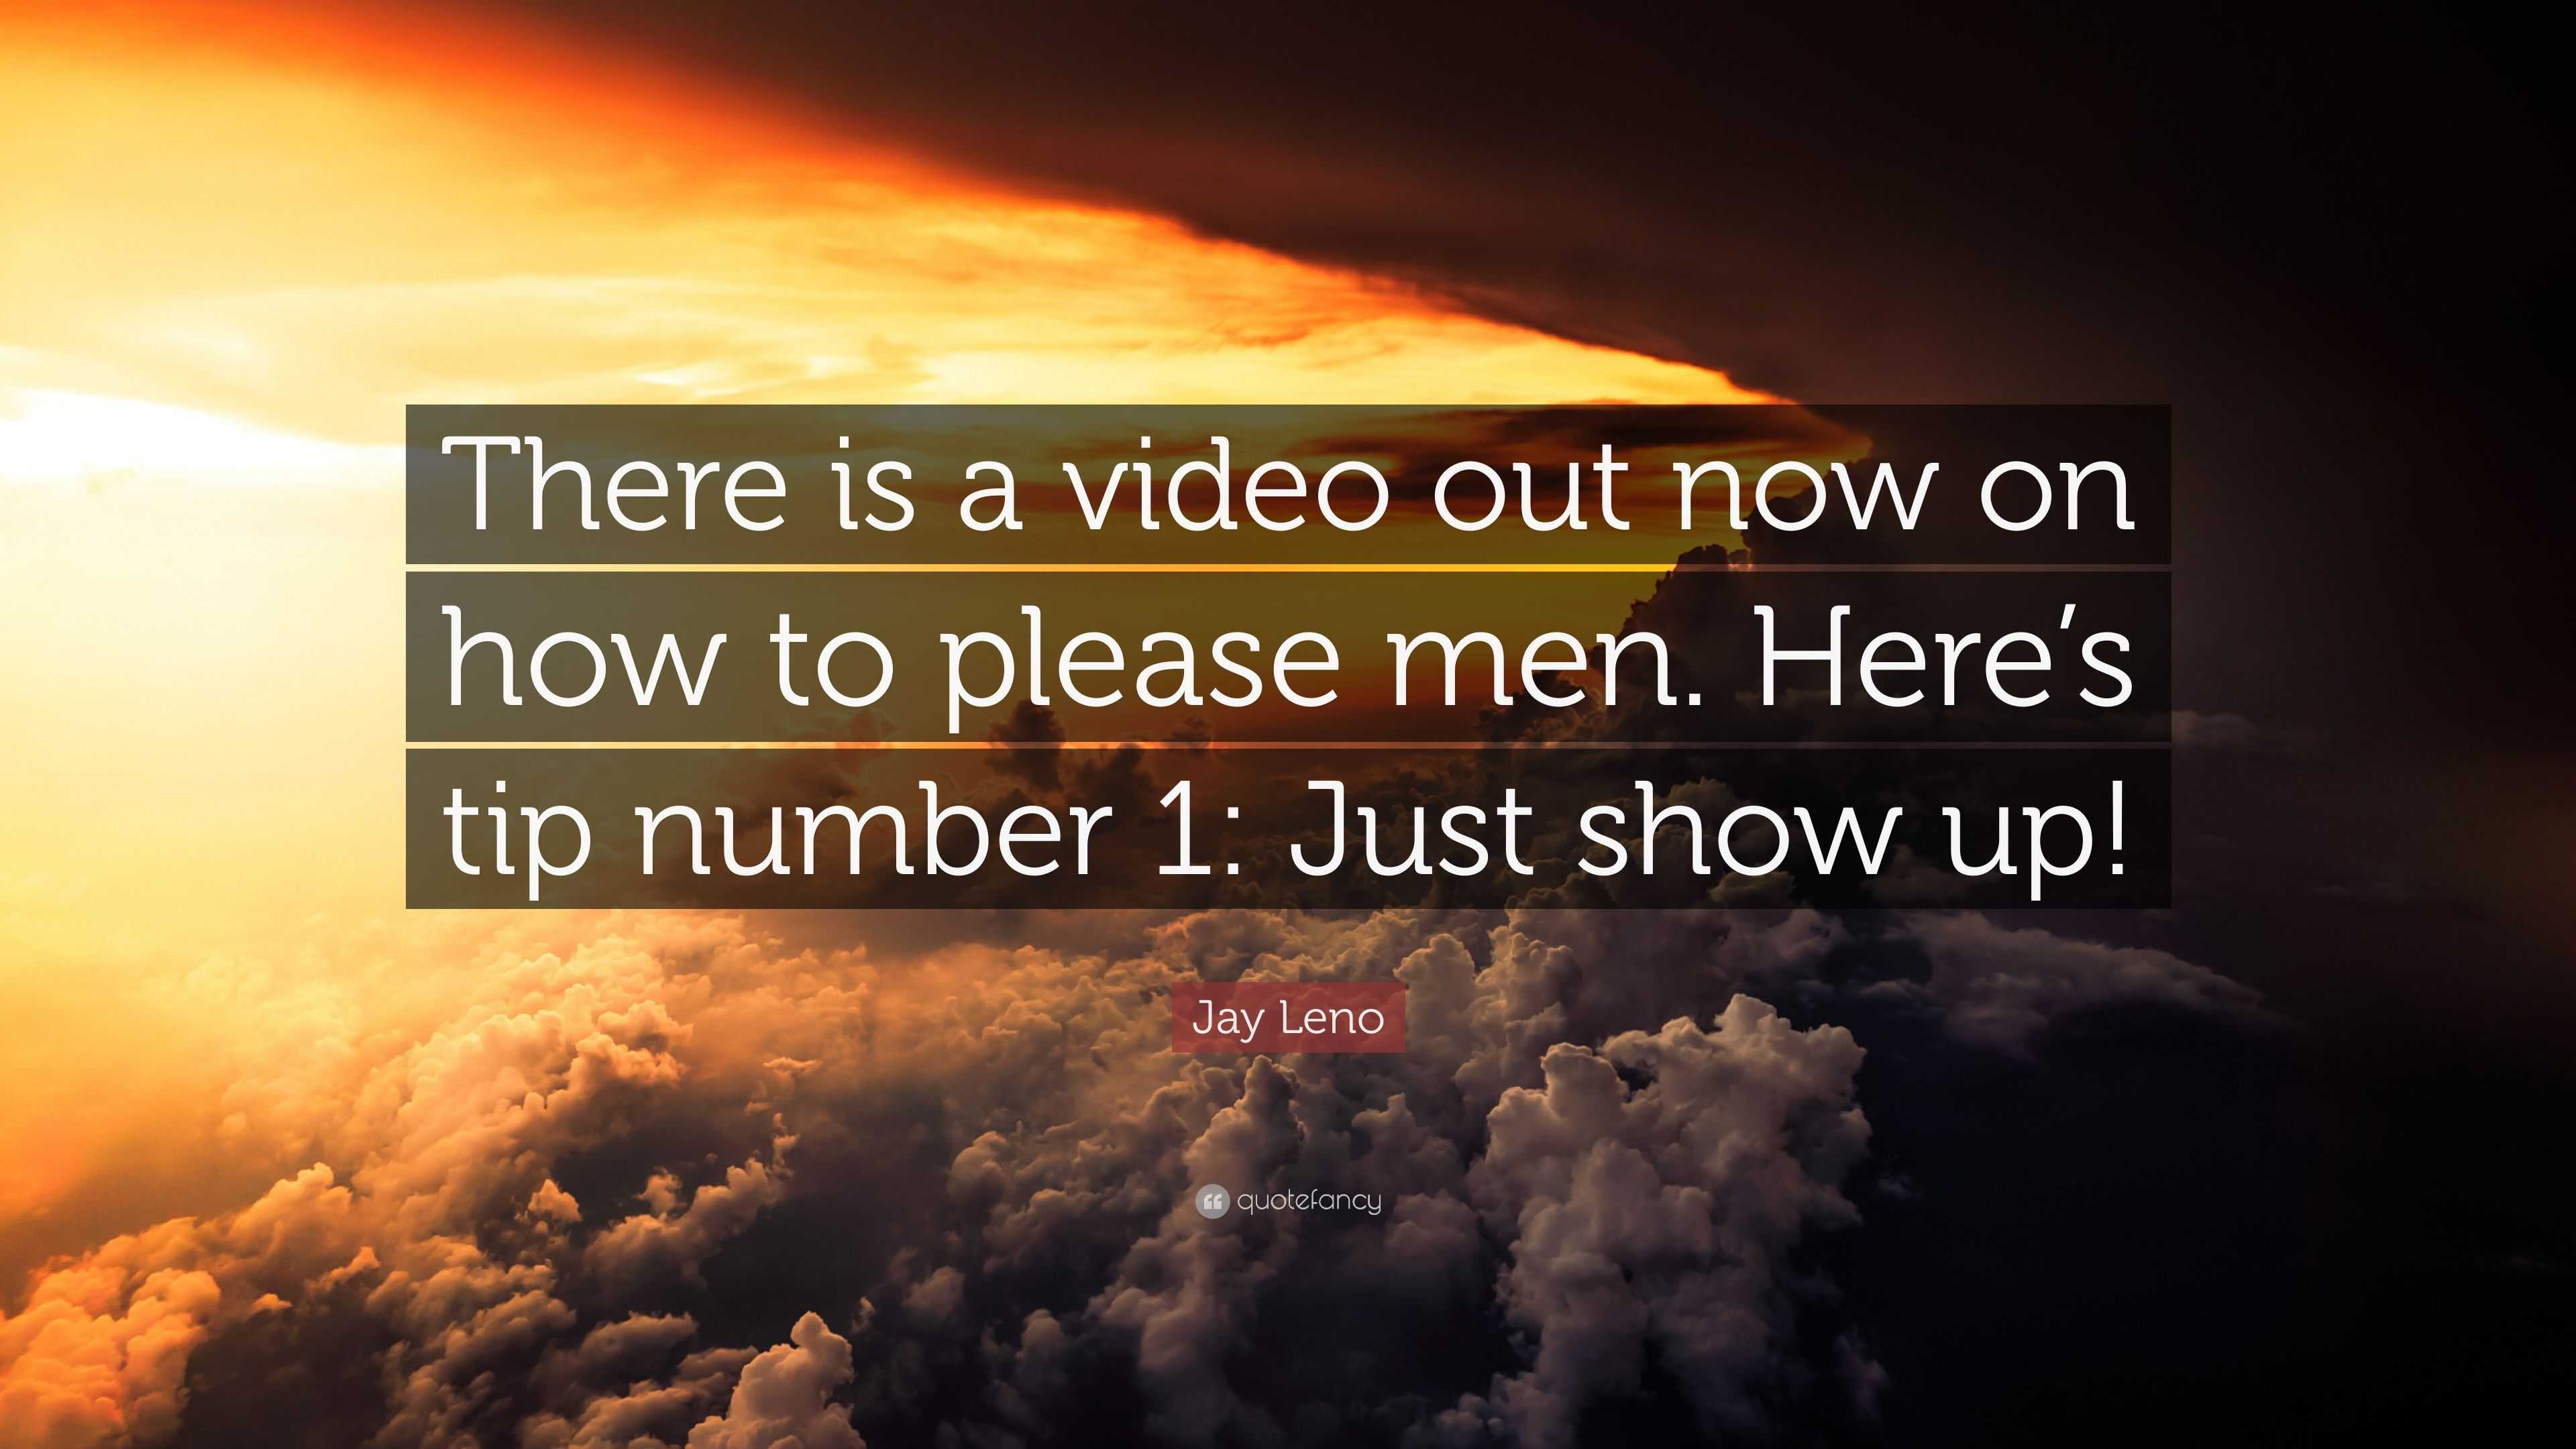 Jay Leno Quote “there Is A Video Out Now On How To Please Men Here S Tip Number 1 Just Show Up ”